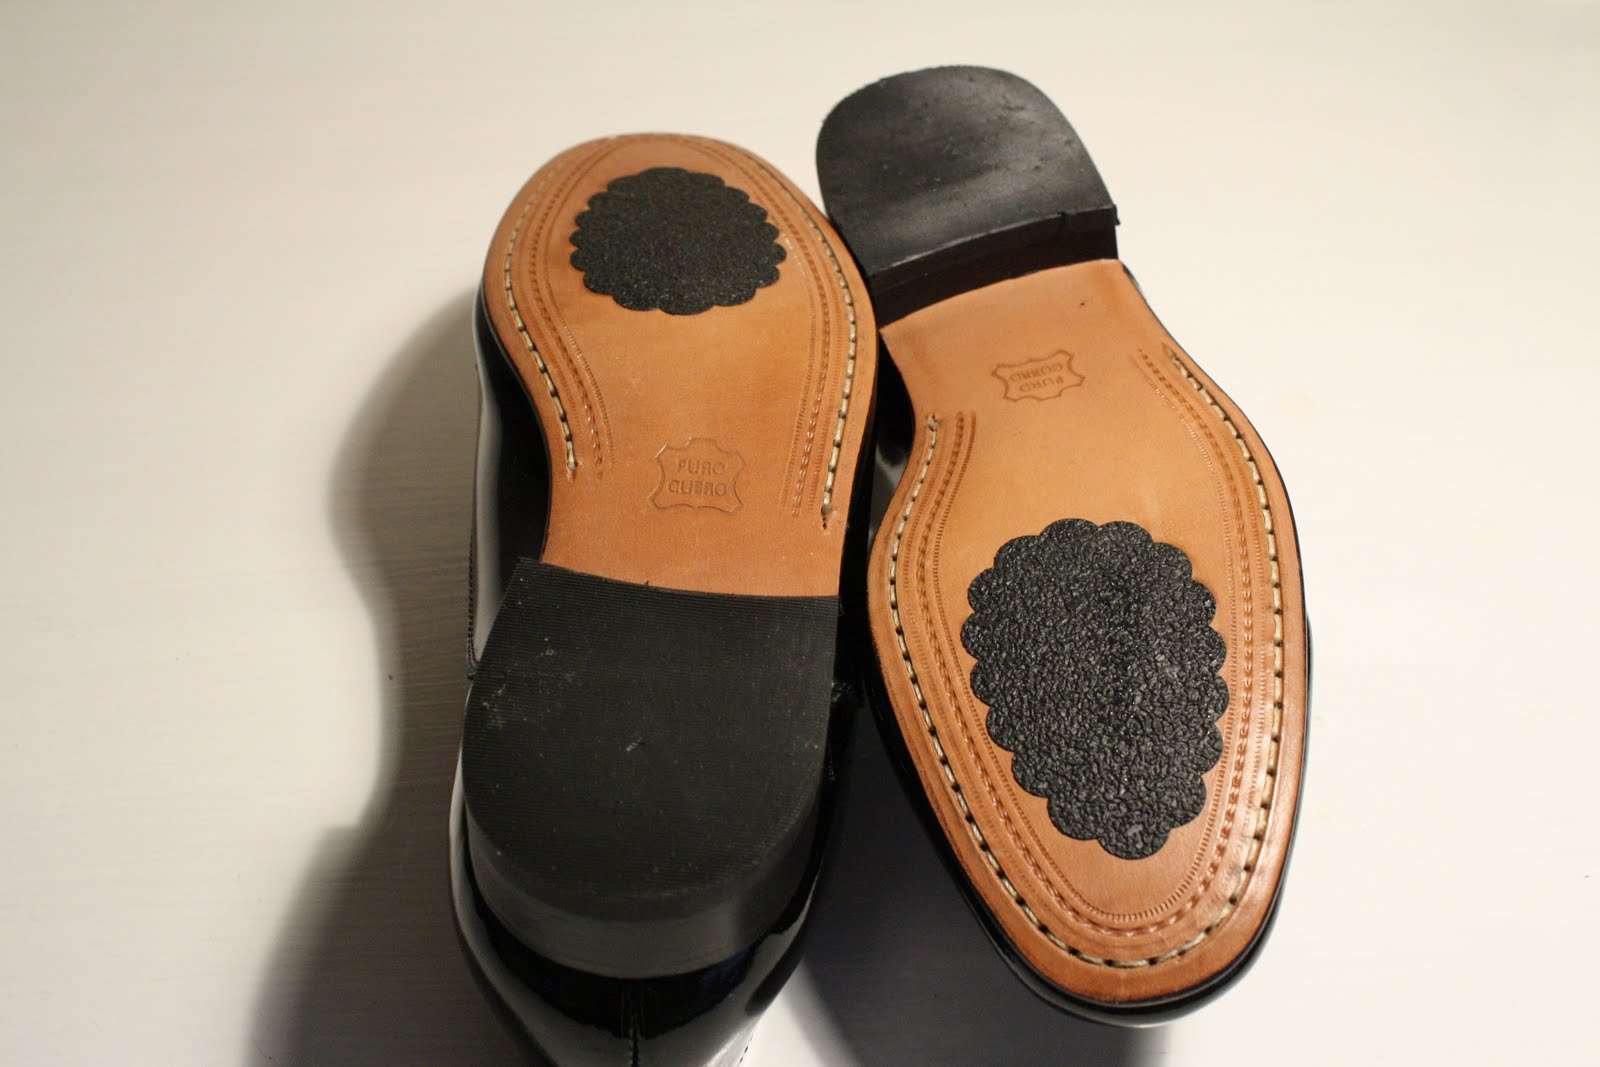 laws of general economy: {SOLD} Black Patent Dieppa Restrepo Flats, Size 9